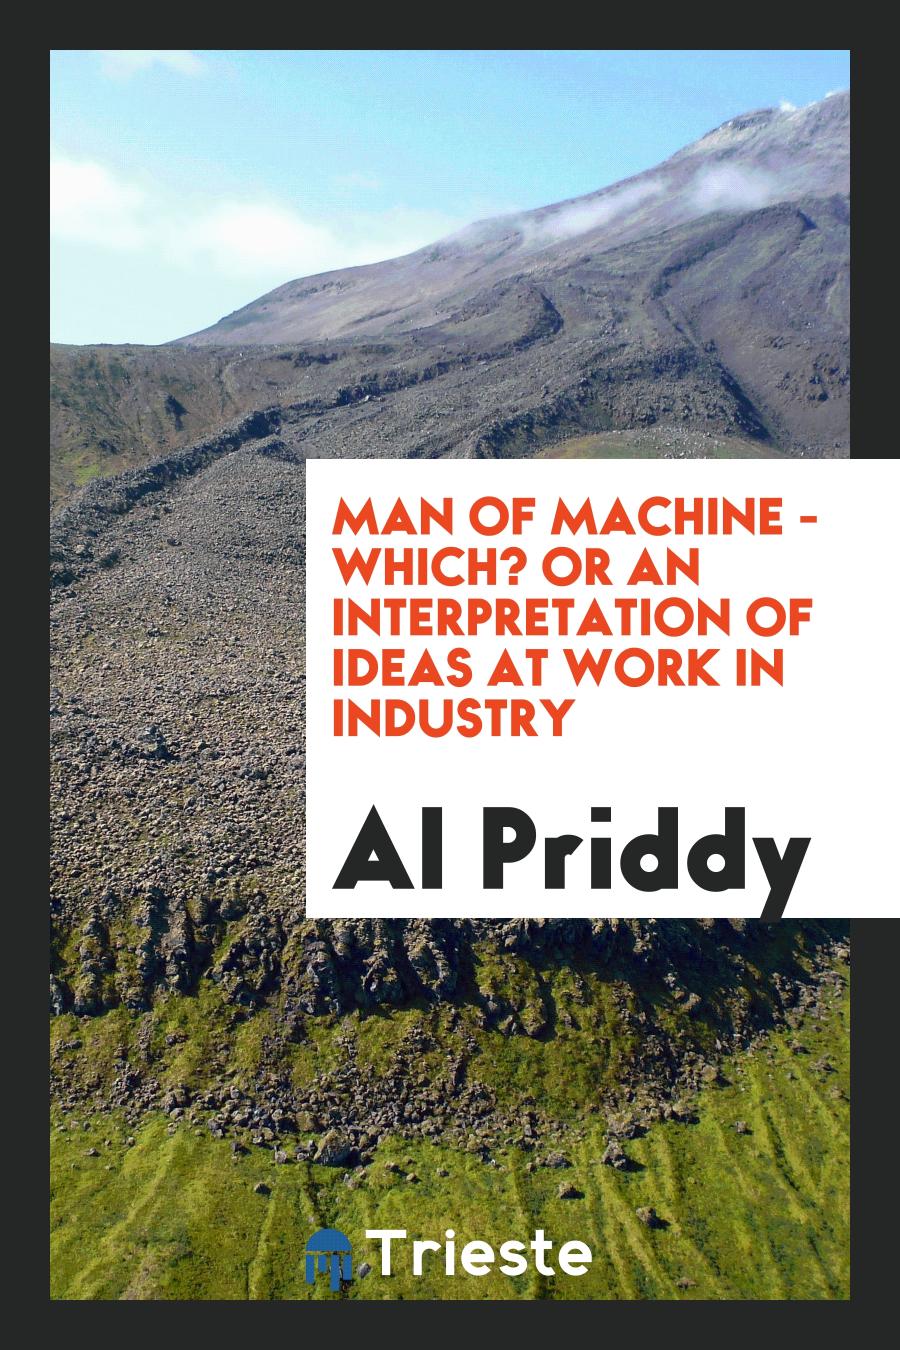 Man of Machine - Which? Or an Interpretation of Ideas at Work in Industry